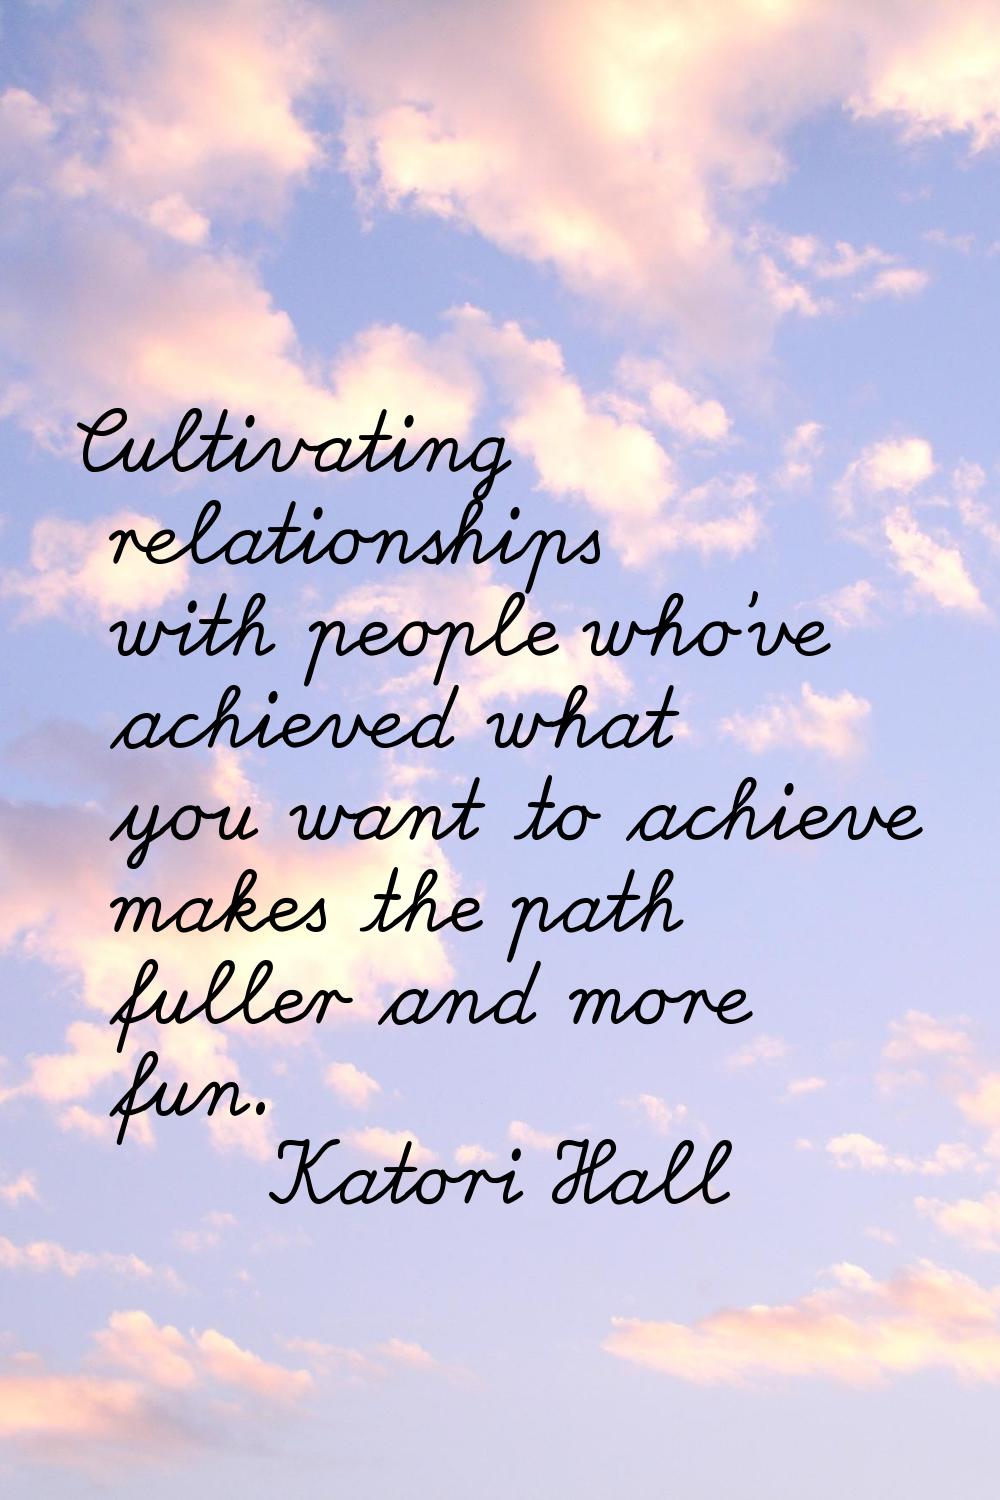 Cultivating relationships with people who've achieved what you want to achieve makes the path fulle